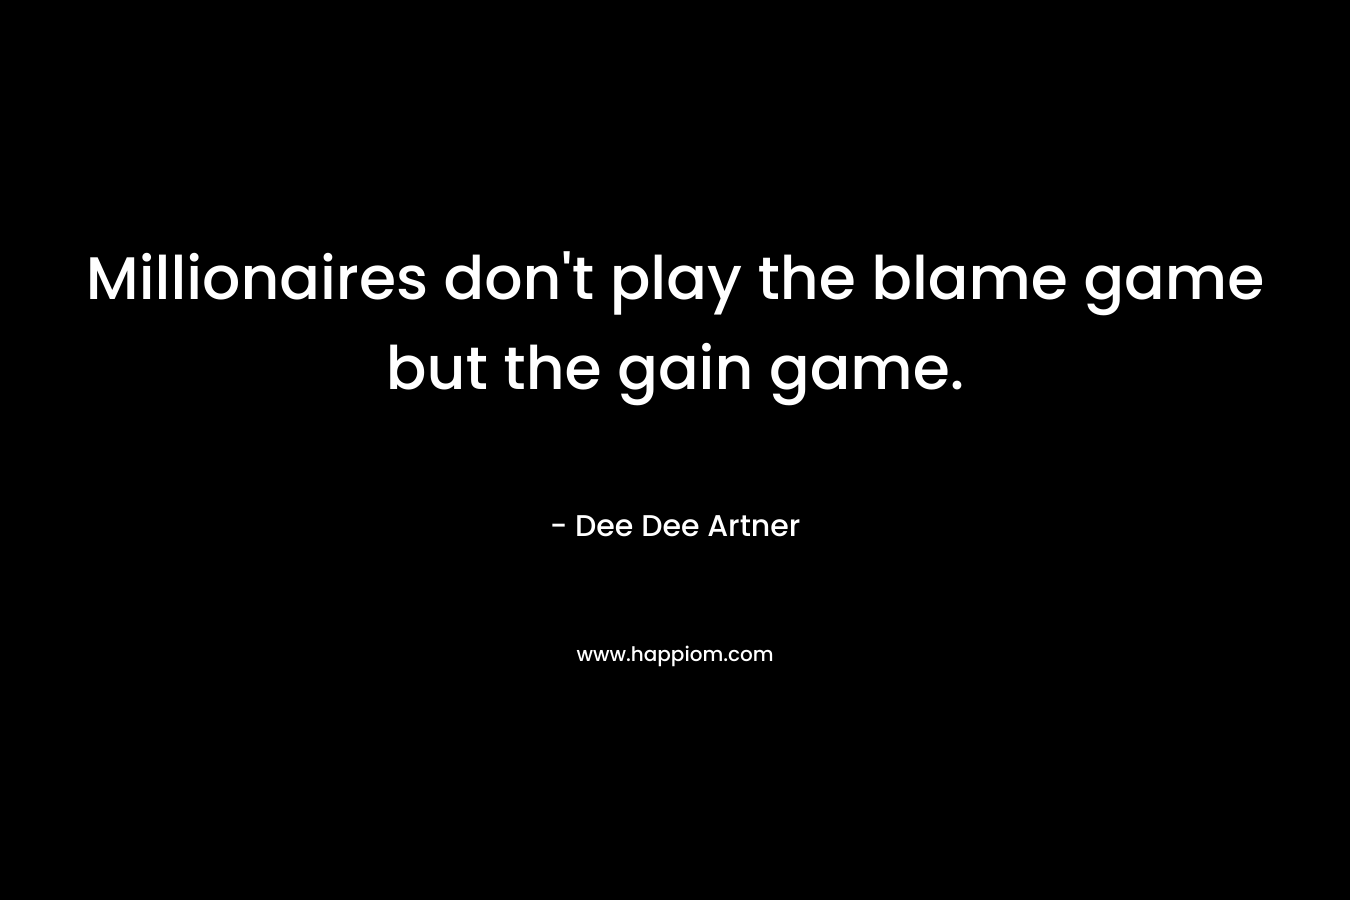 Millionaires don't play the blame game but the gain game.